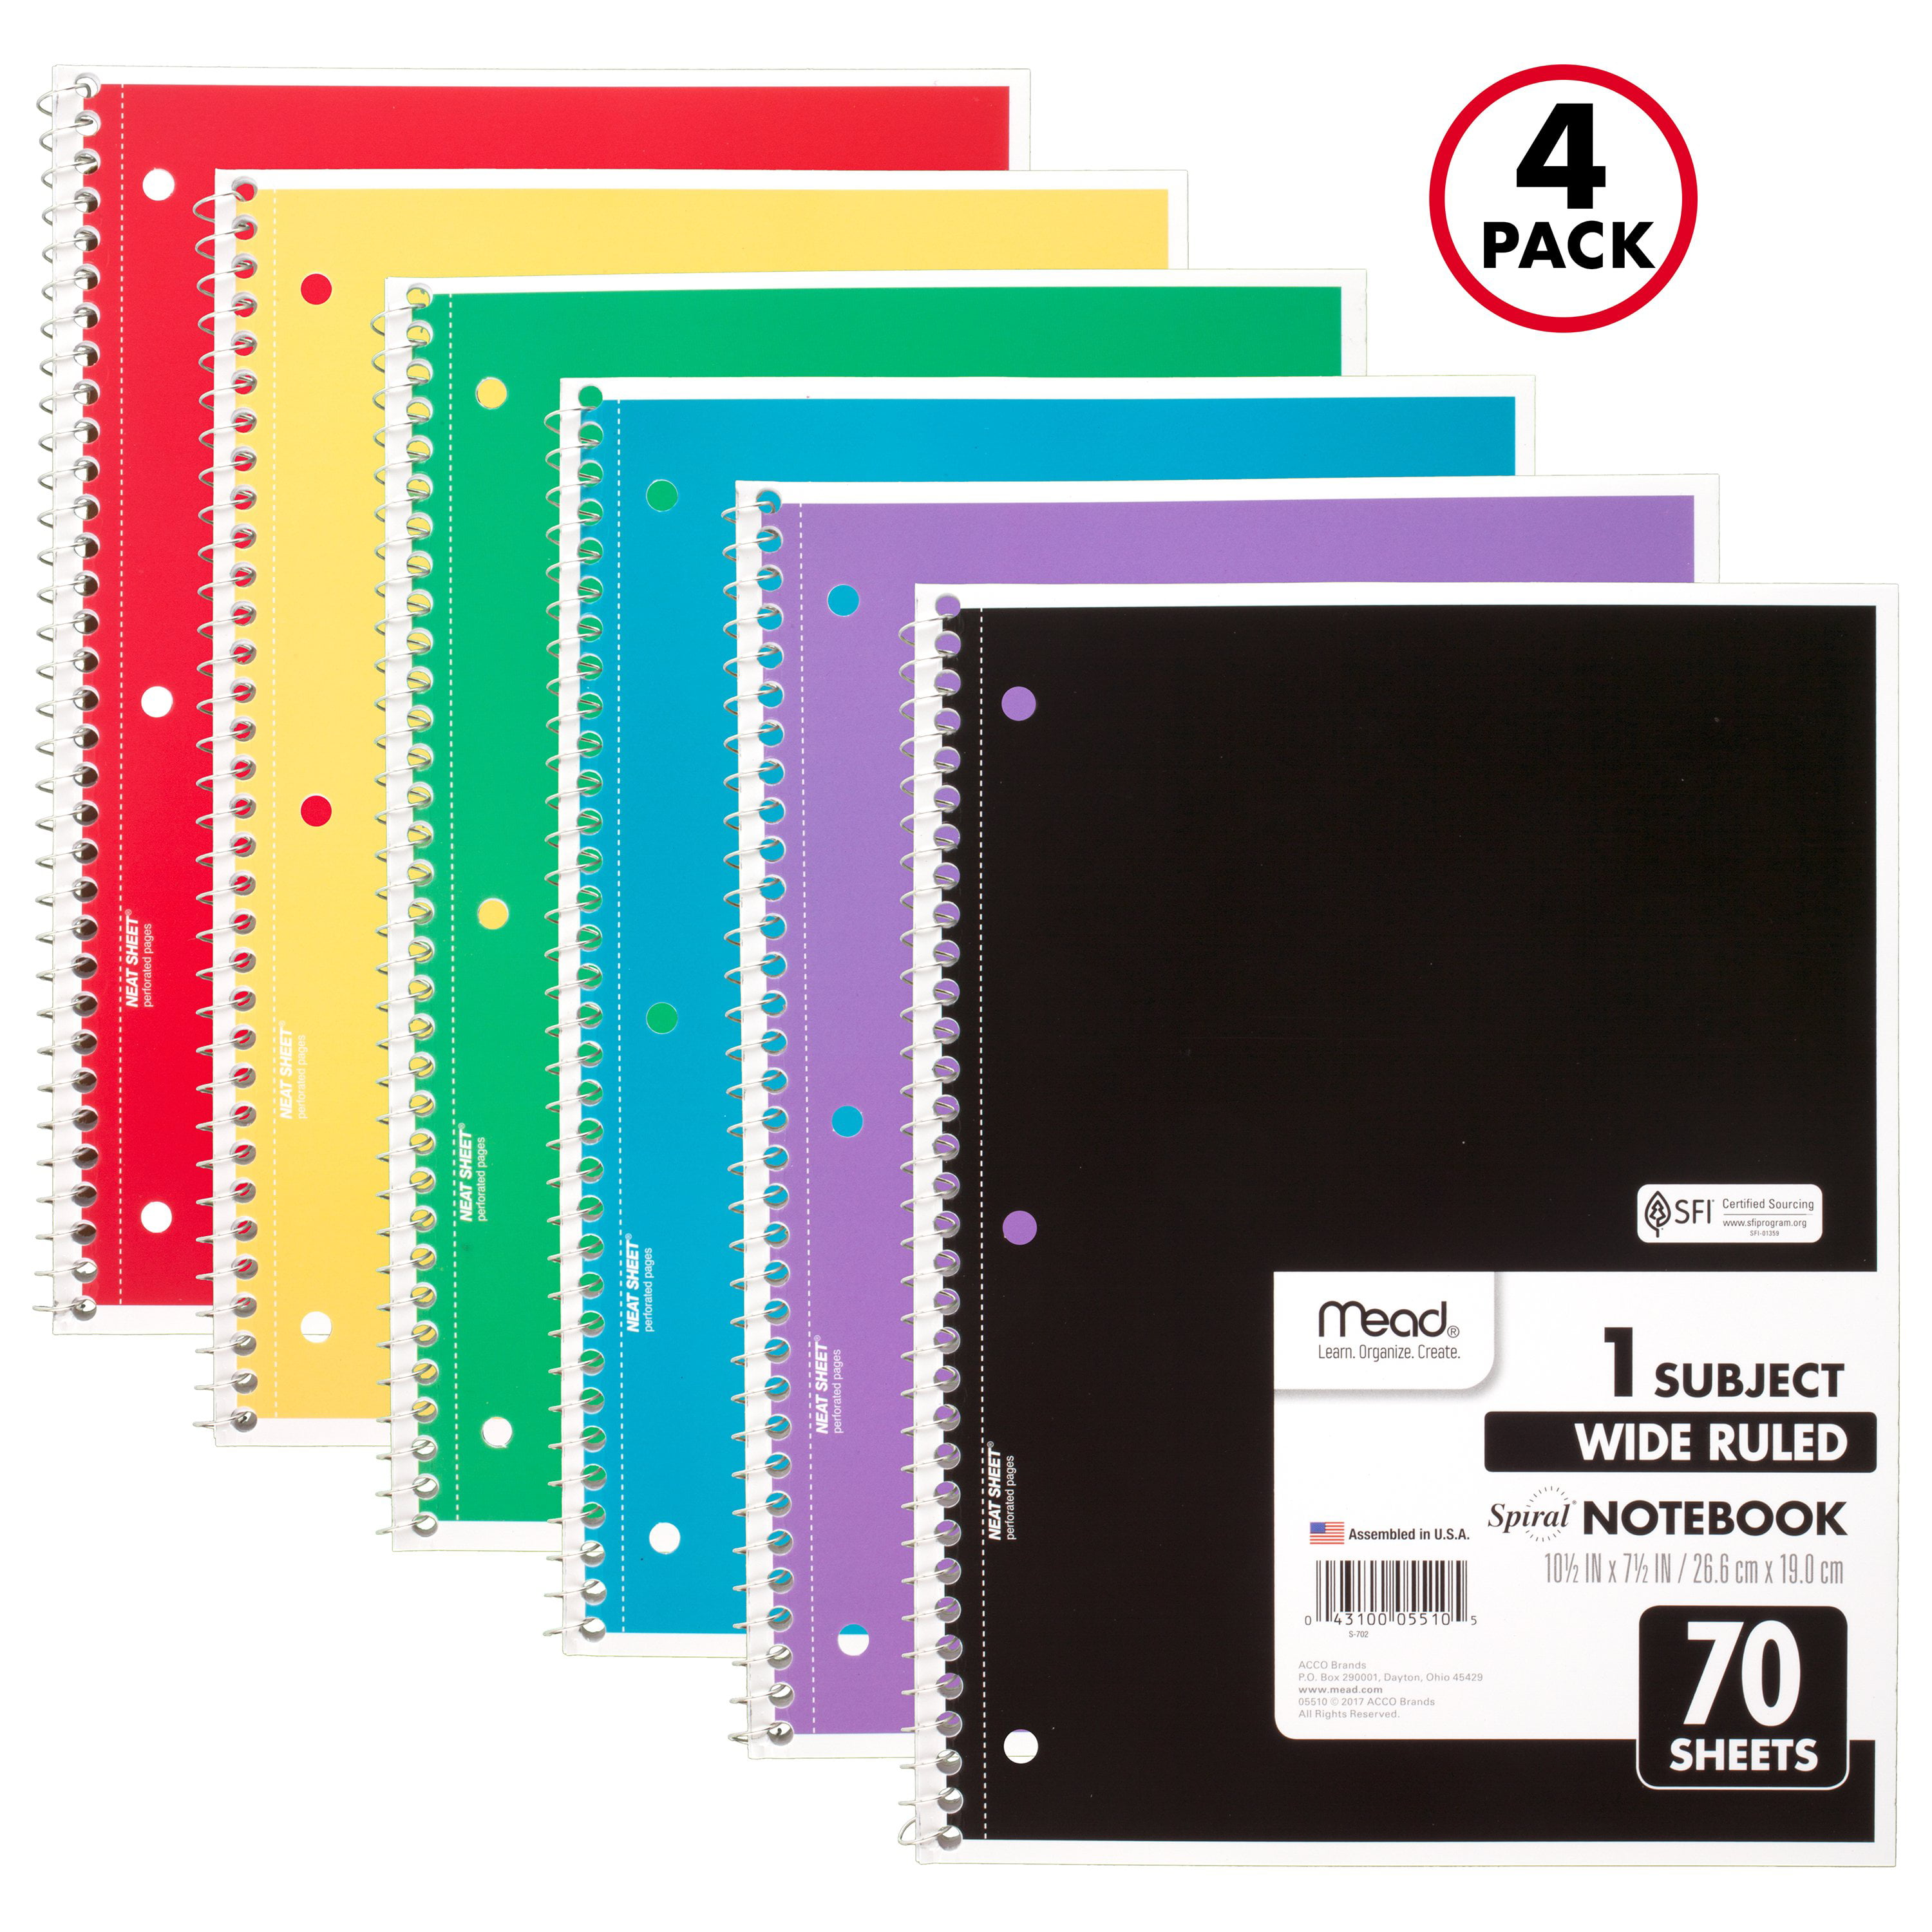 70 Pages Spiral Notebook 6 Pack of 1-Subject College Ruled Spiral Bound Notebooks Cute School Notebooks Pantone Colors